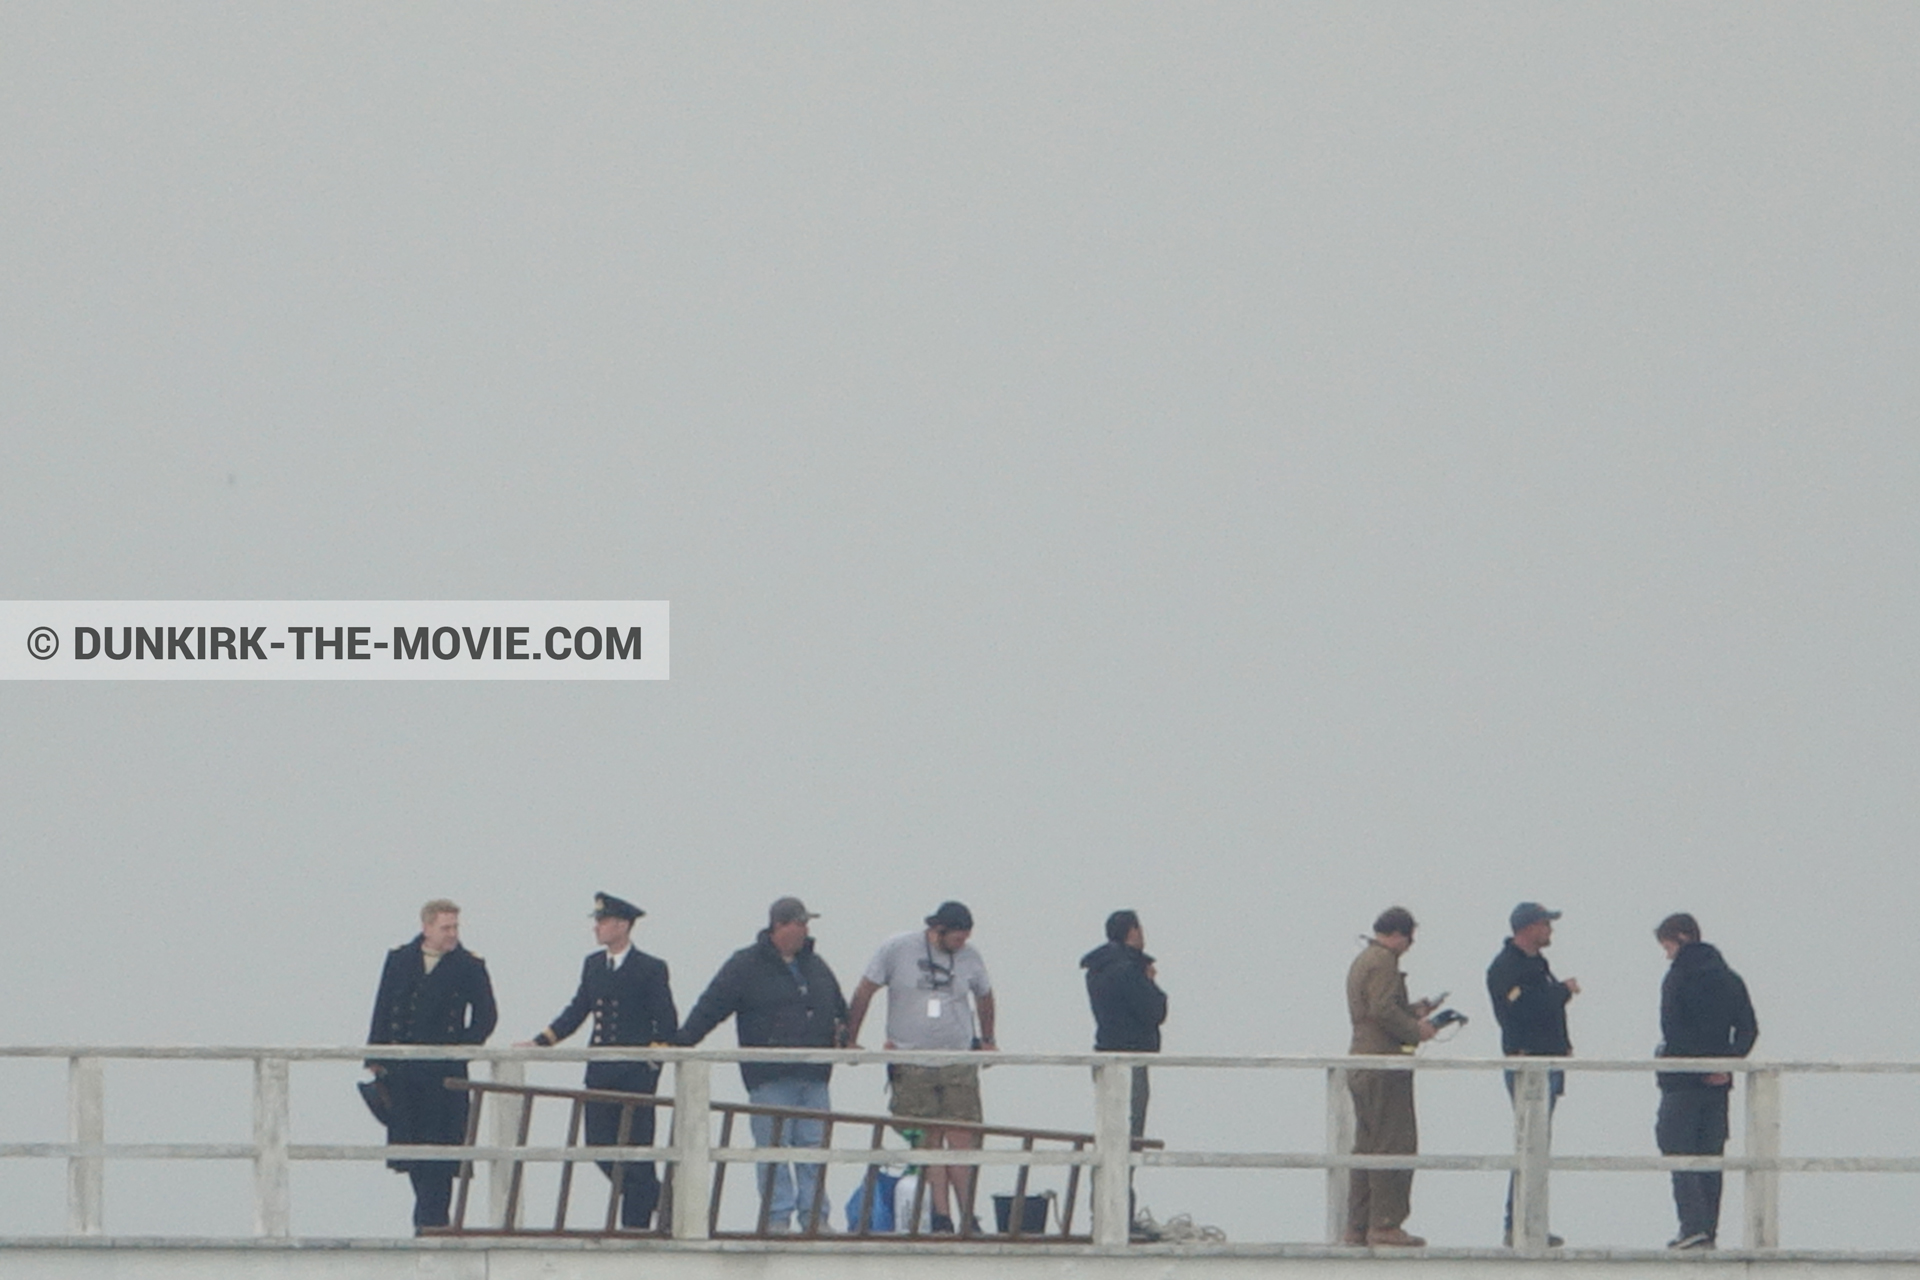 Picture with actor, grey sky, EST pier, Kenneth Branagh, technical team,  from behind the scene of the Dunkirk movie by Nolan